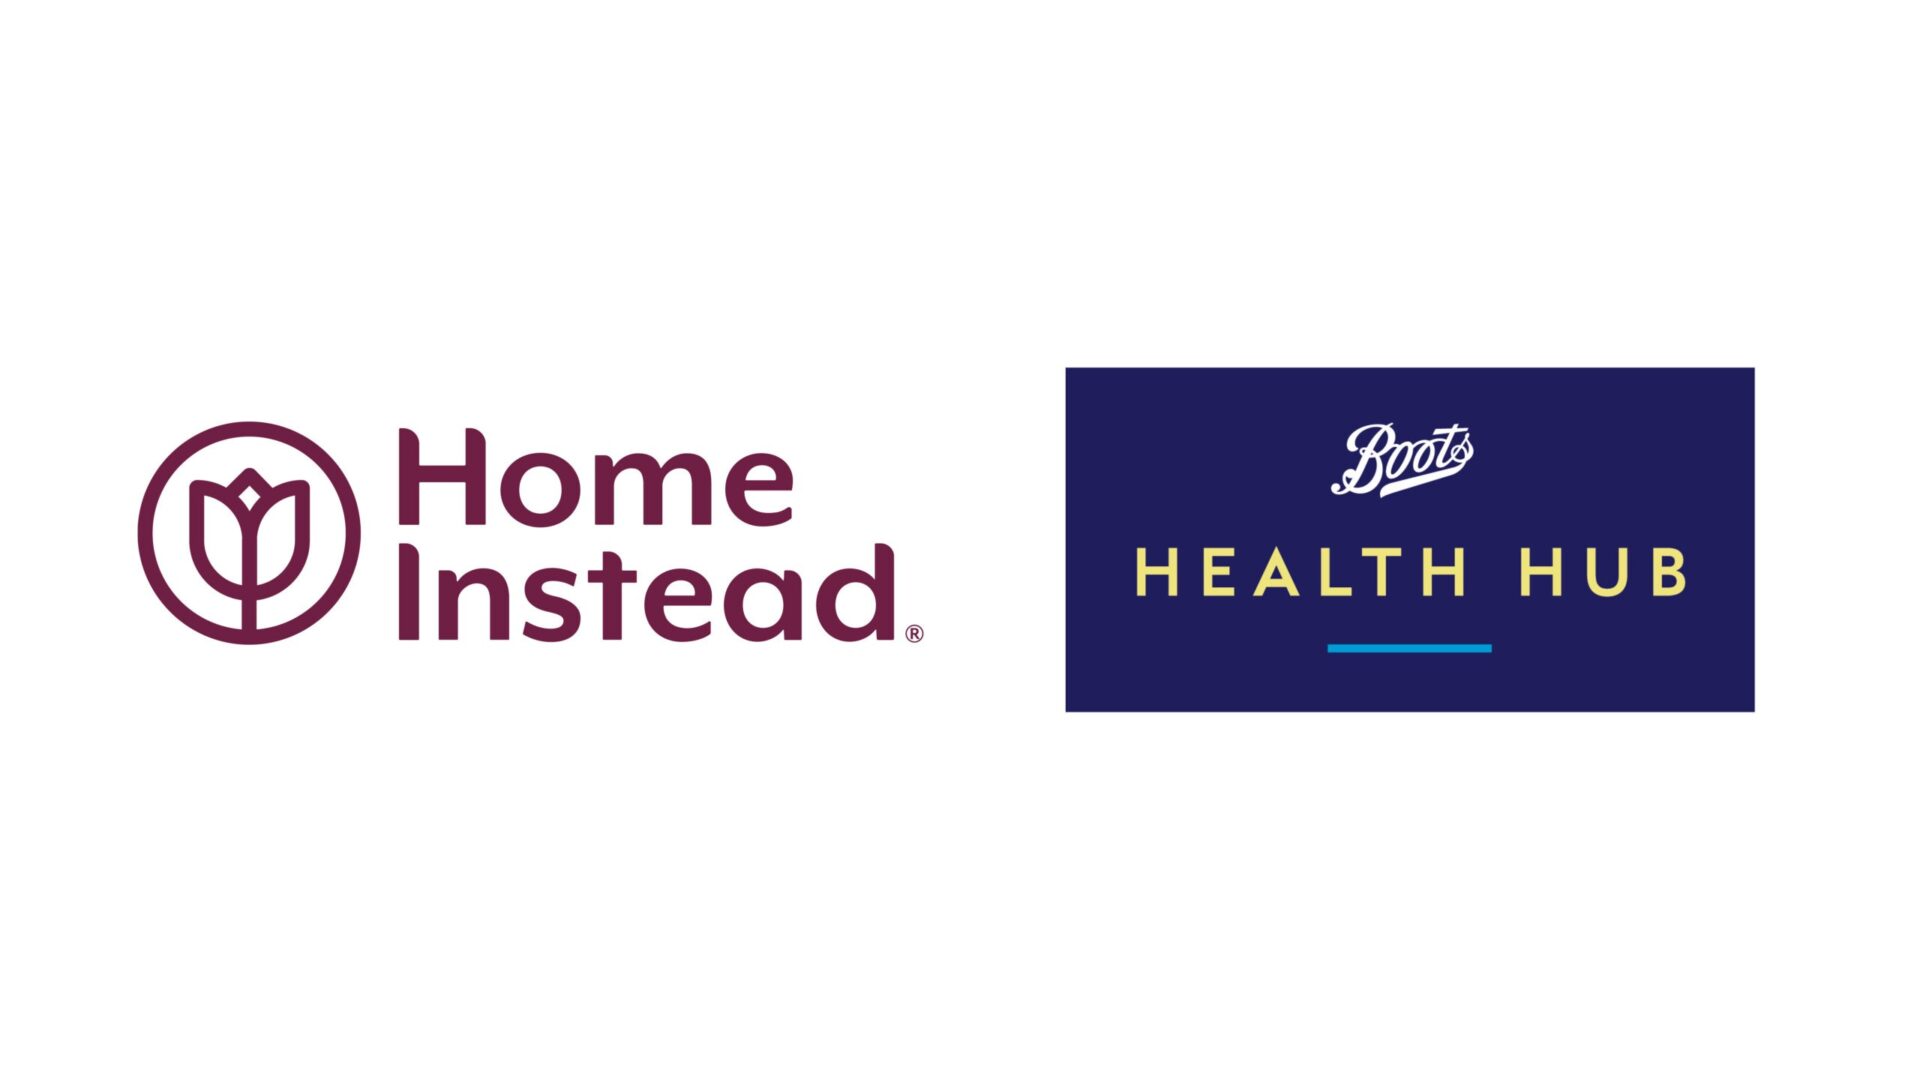 Home Instead partners with Boots UK